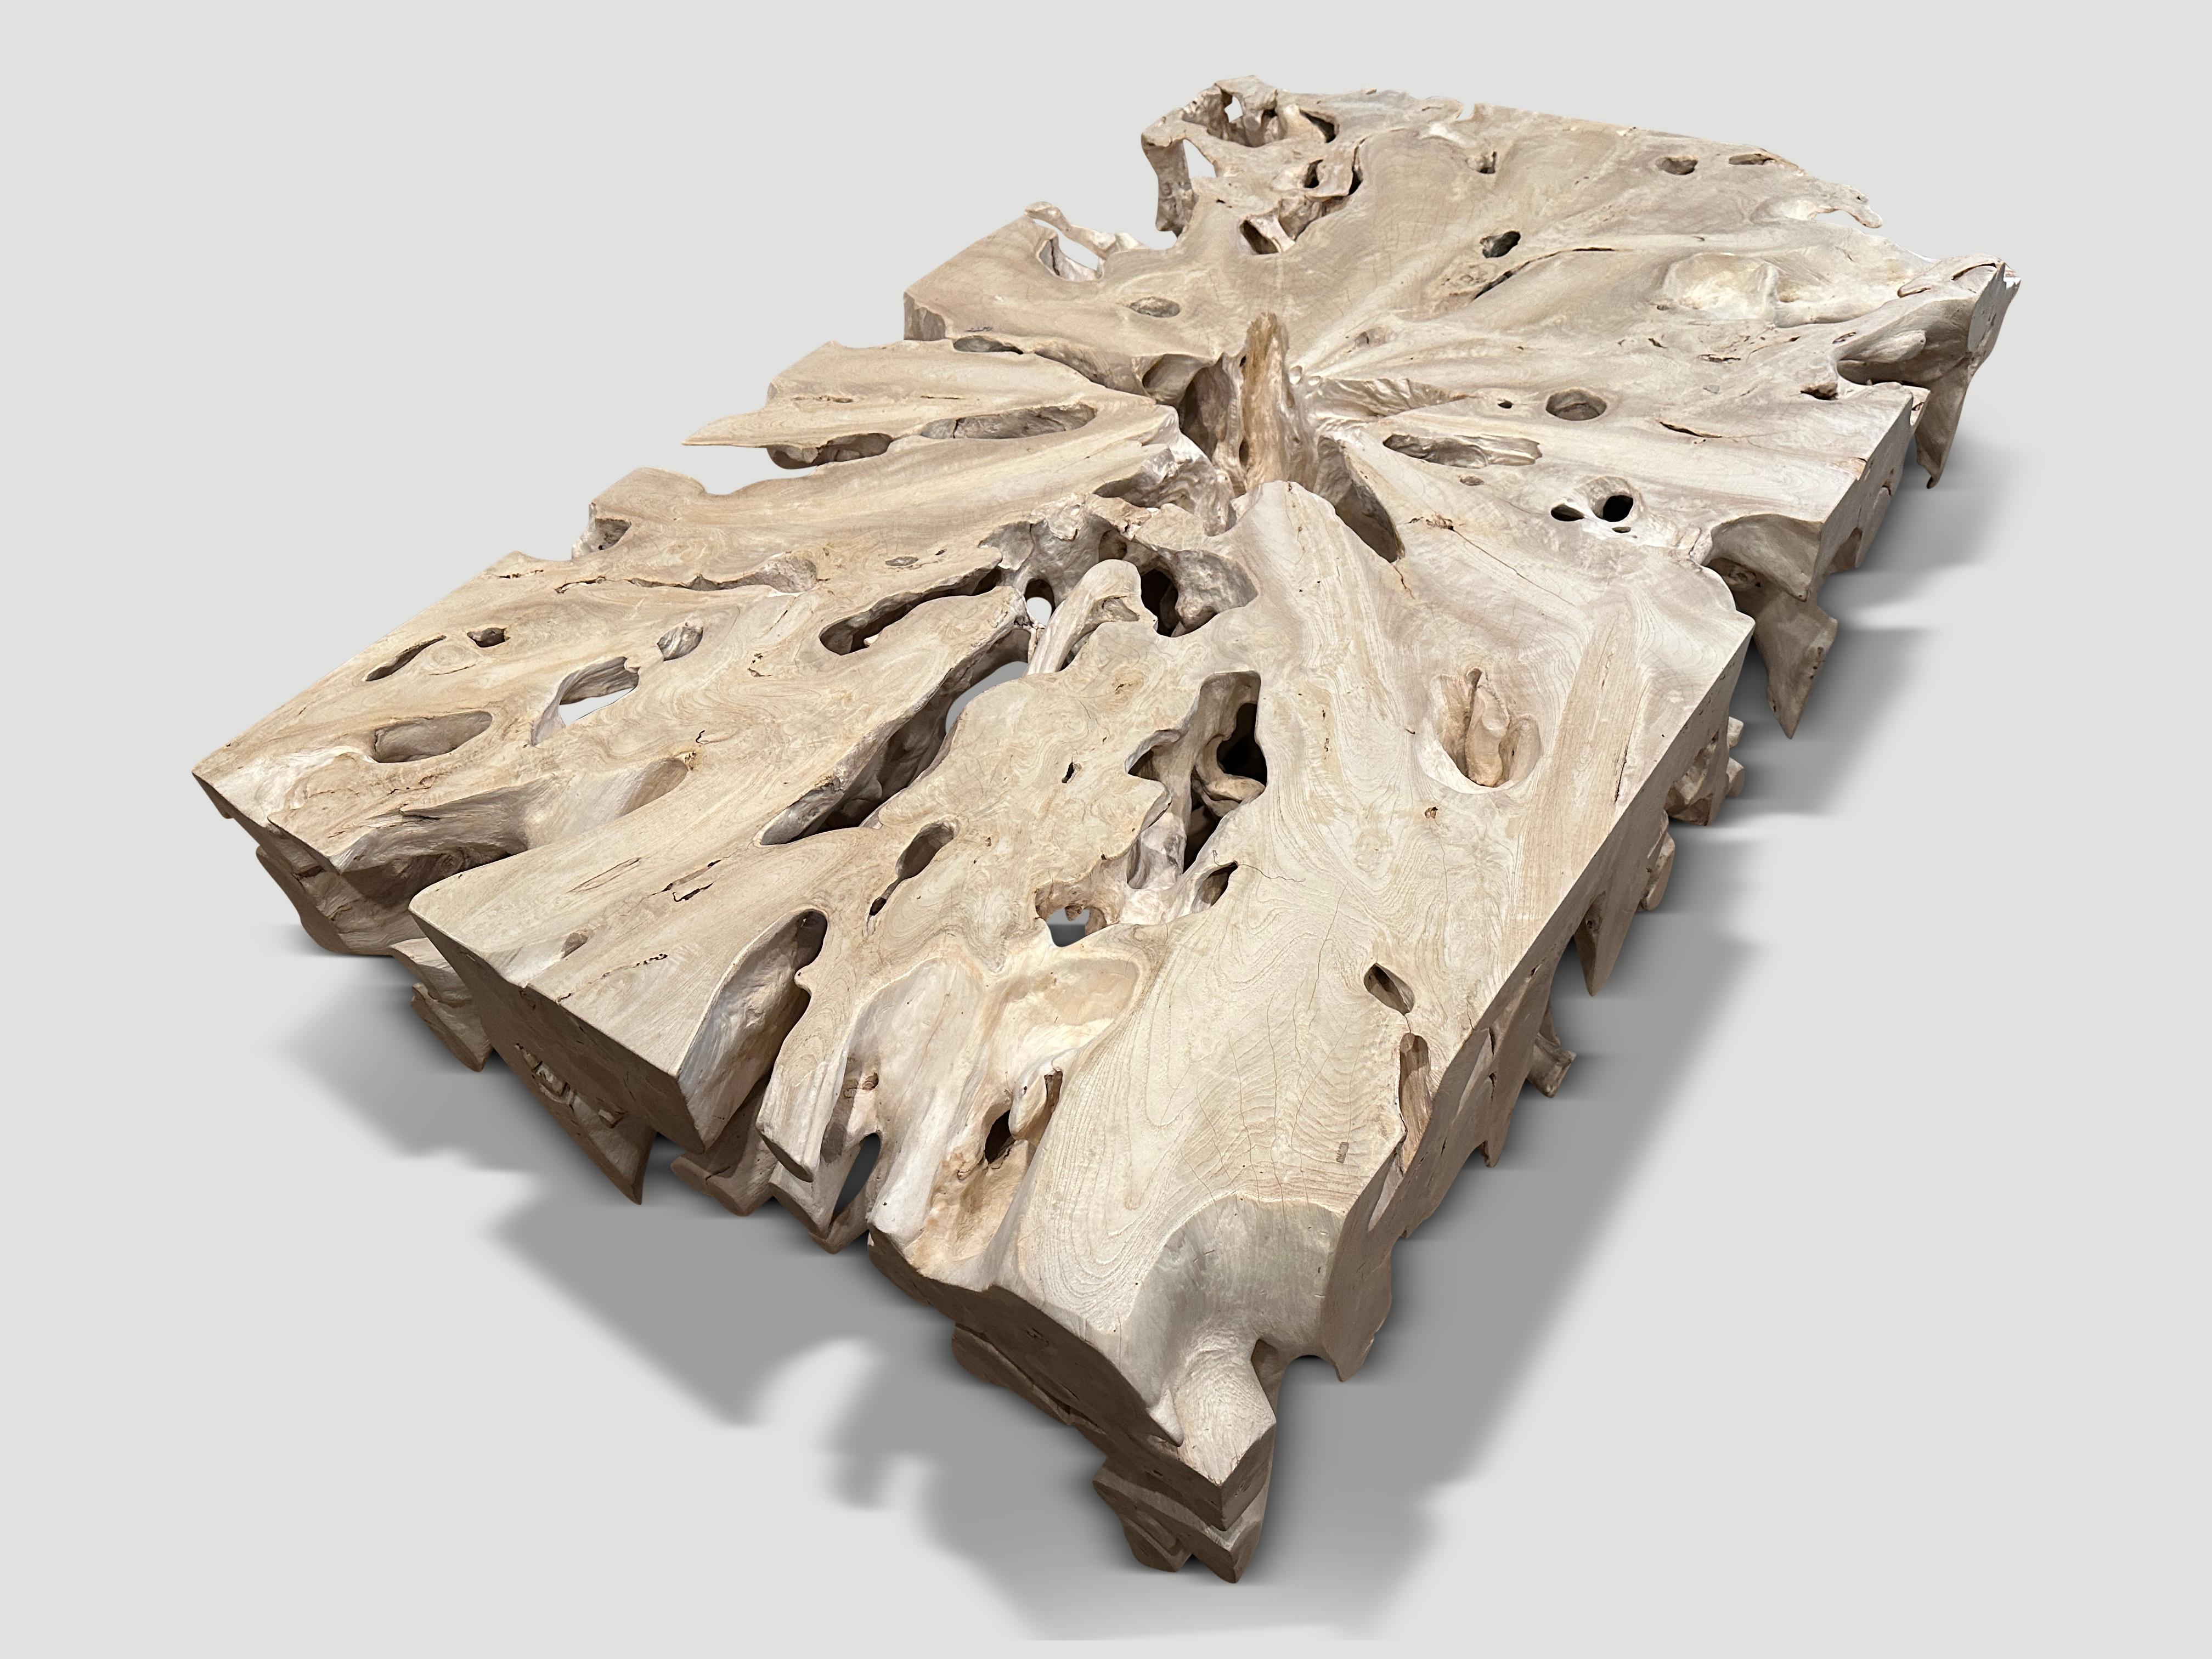 Bleached teak root coffee table or if turned on the side a console or room divider at 55.5” wide x 14” deep x 36” high. Hand cut, shaped and sanded from a single reclaimed teak root.  We added a polish to the top and flat sections on the side, for